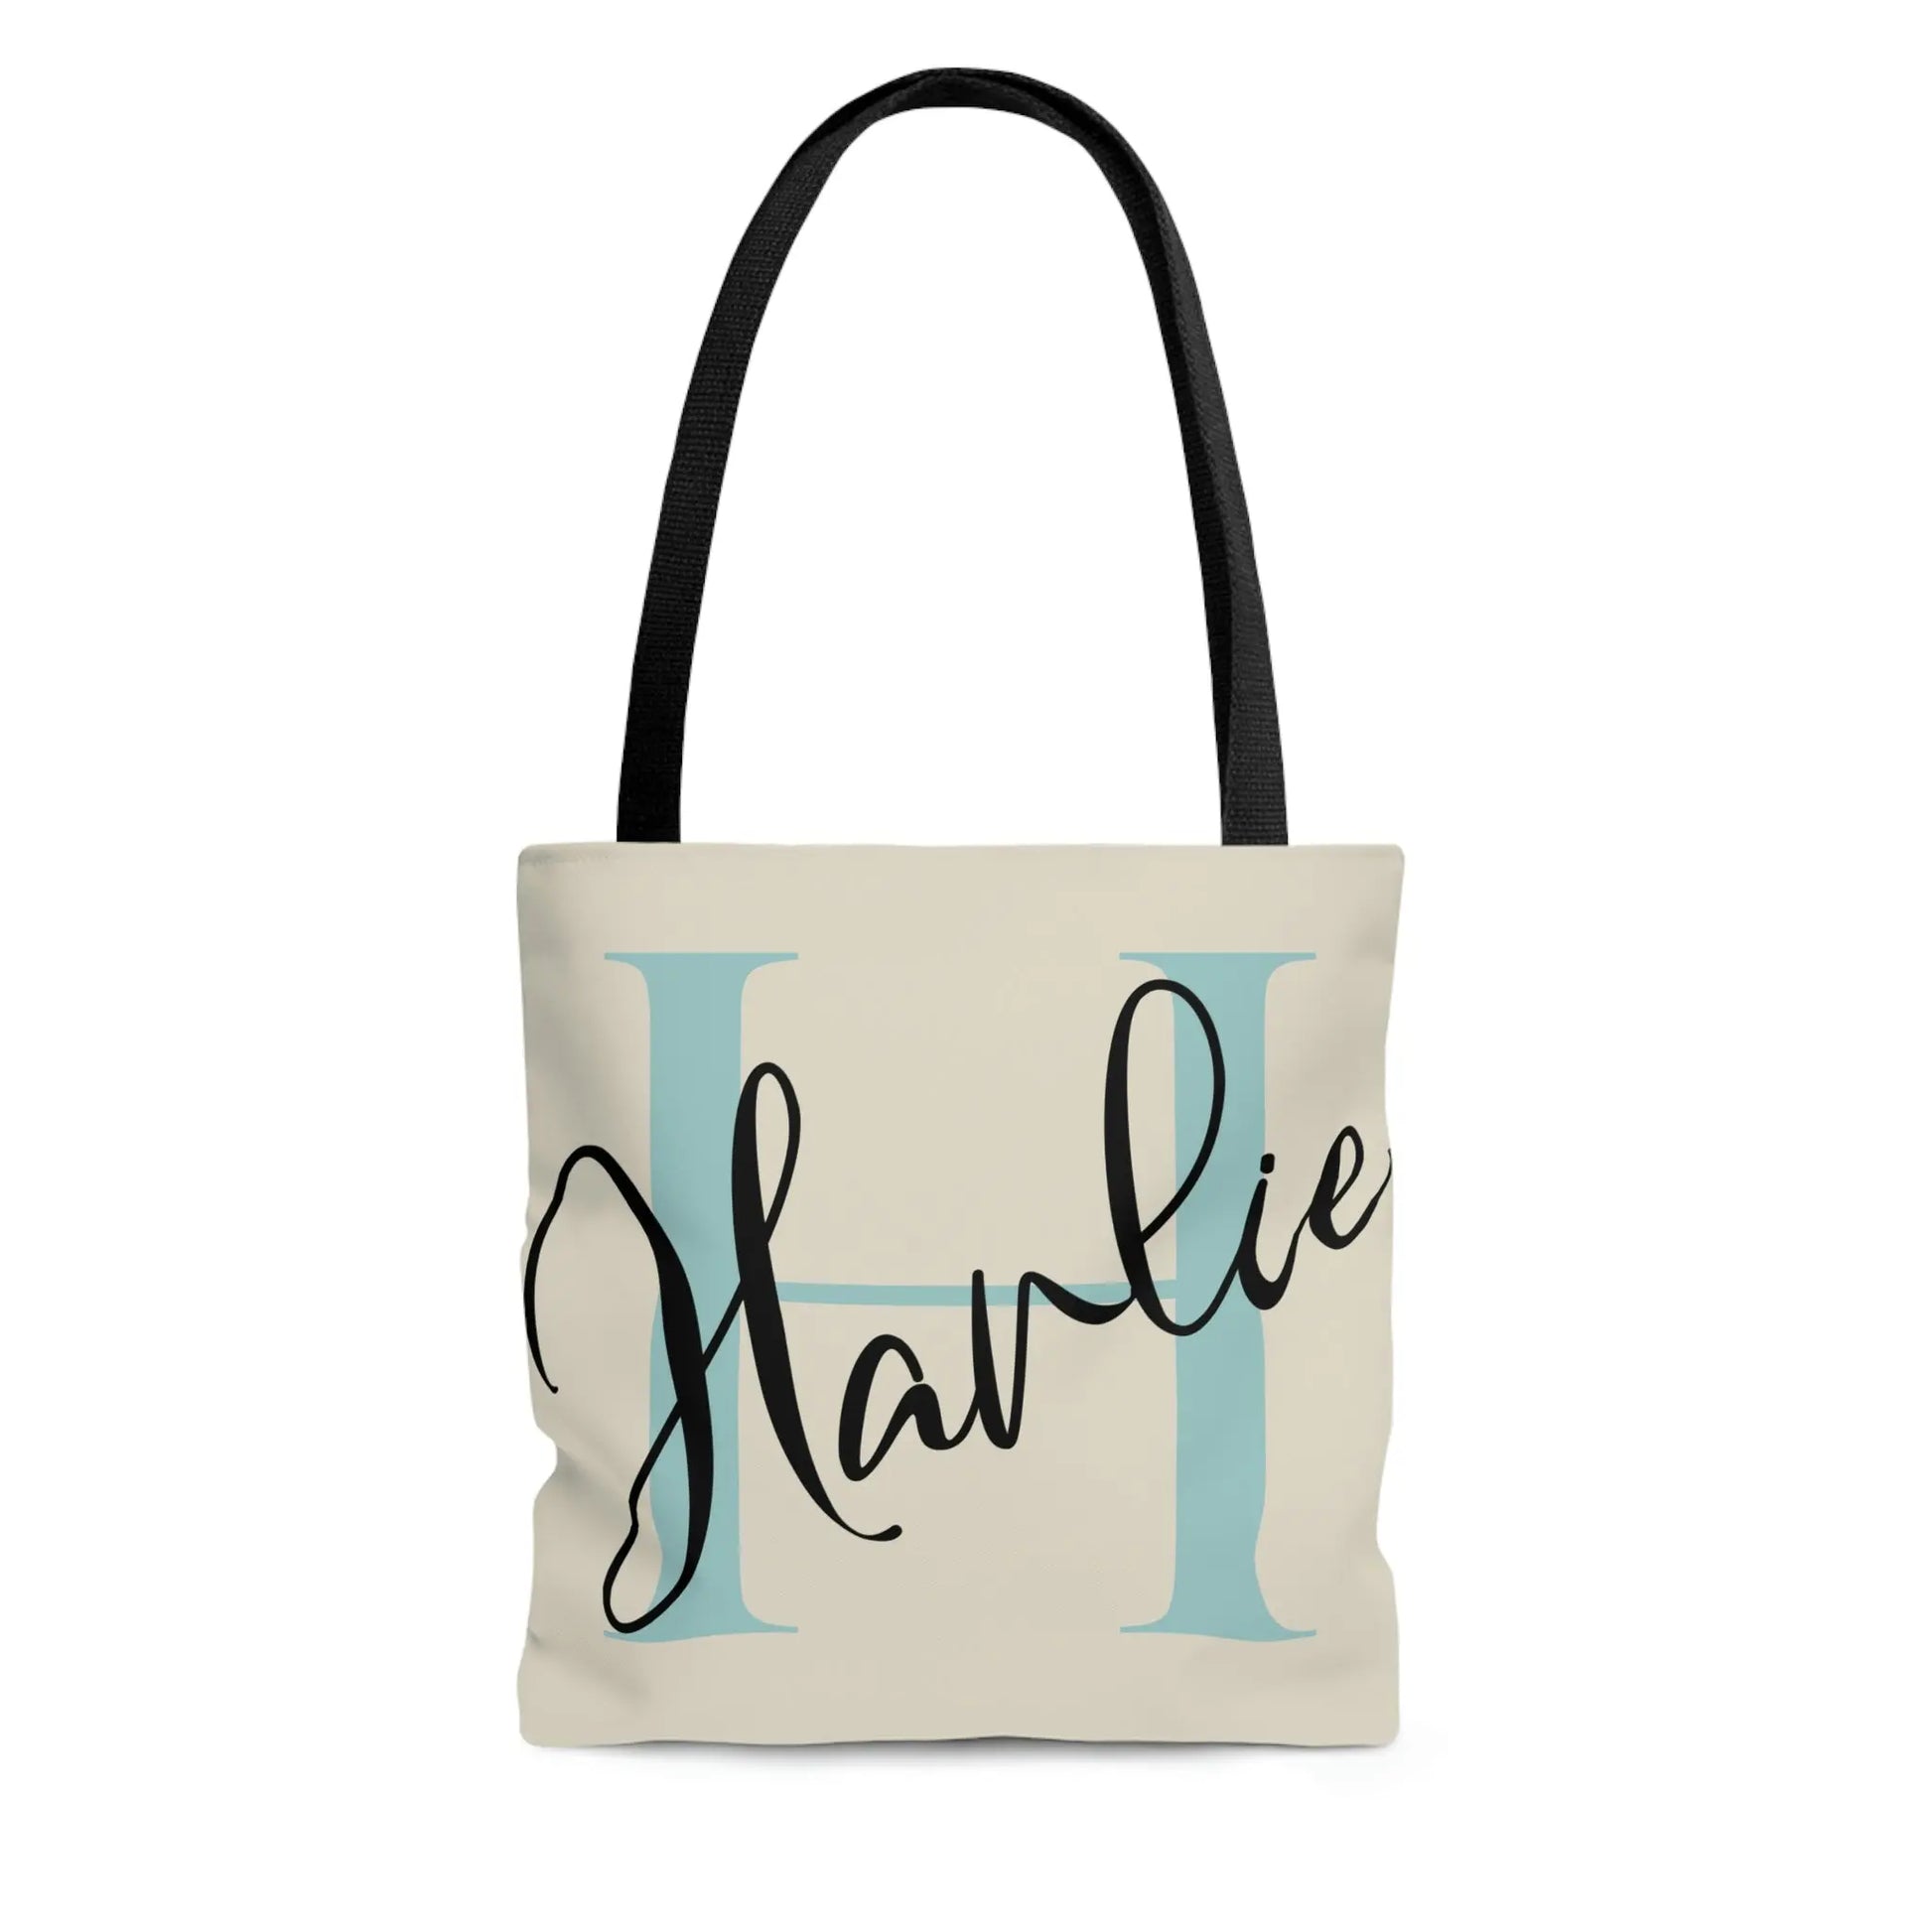 Monogram Name Tote Bag, Personalized Tote Bags, Bridesmaid Tote, Beach Tote,  Bridesmaid Gift, Bridal Party Gifts, Wedding Welcome Bag